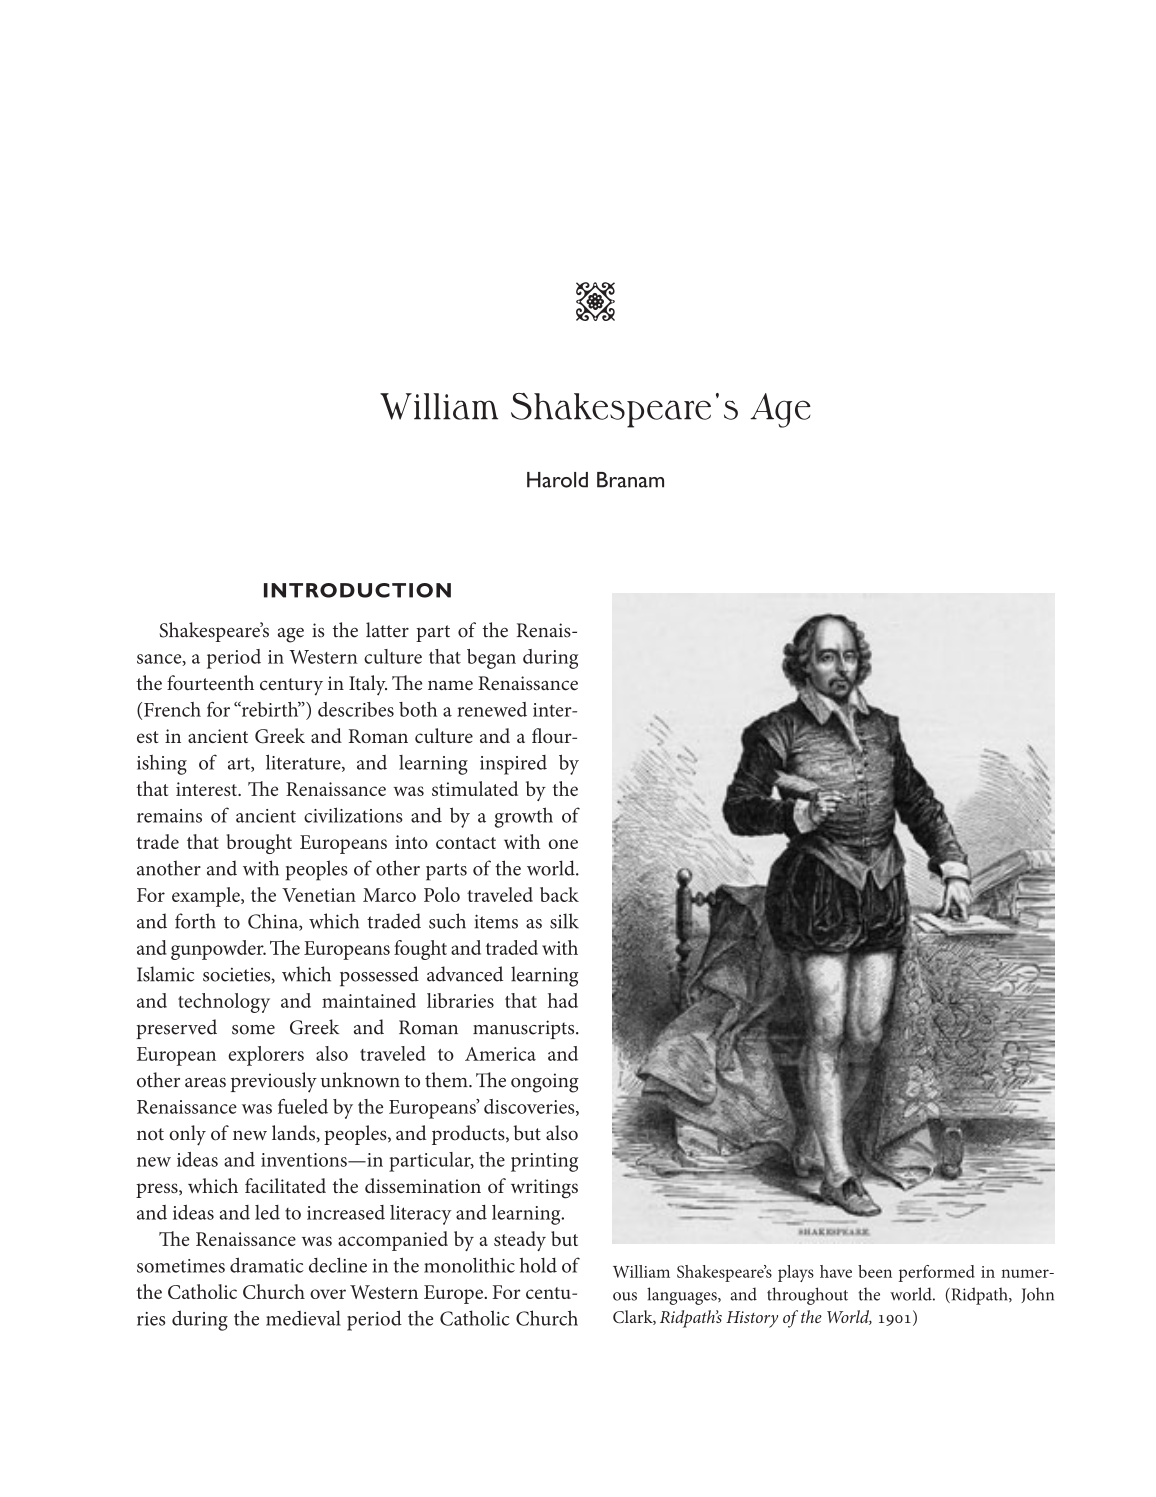 The Definitive Shakespeare Companion: Overviews, Documents, and Analysis [4 volumes] page 3